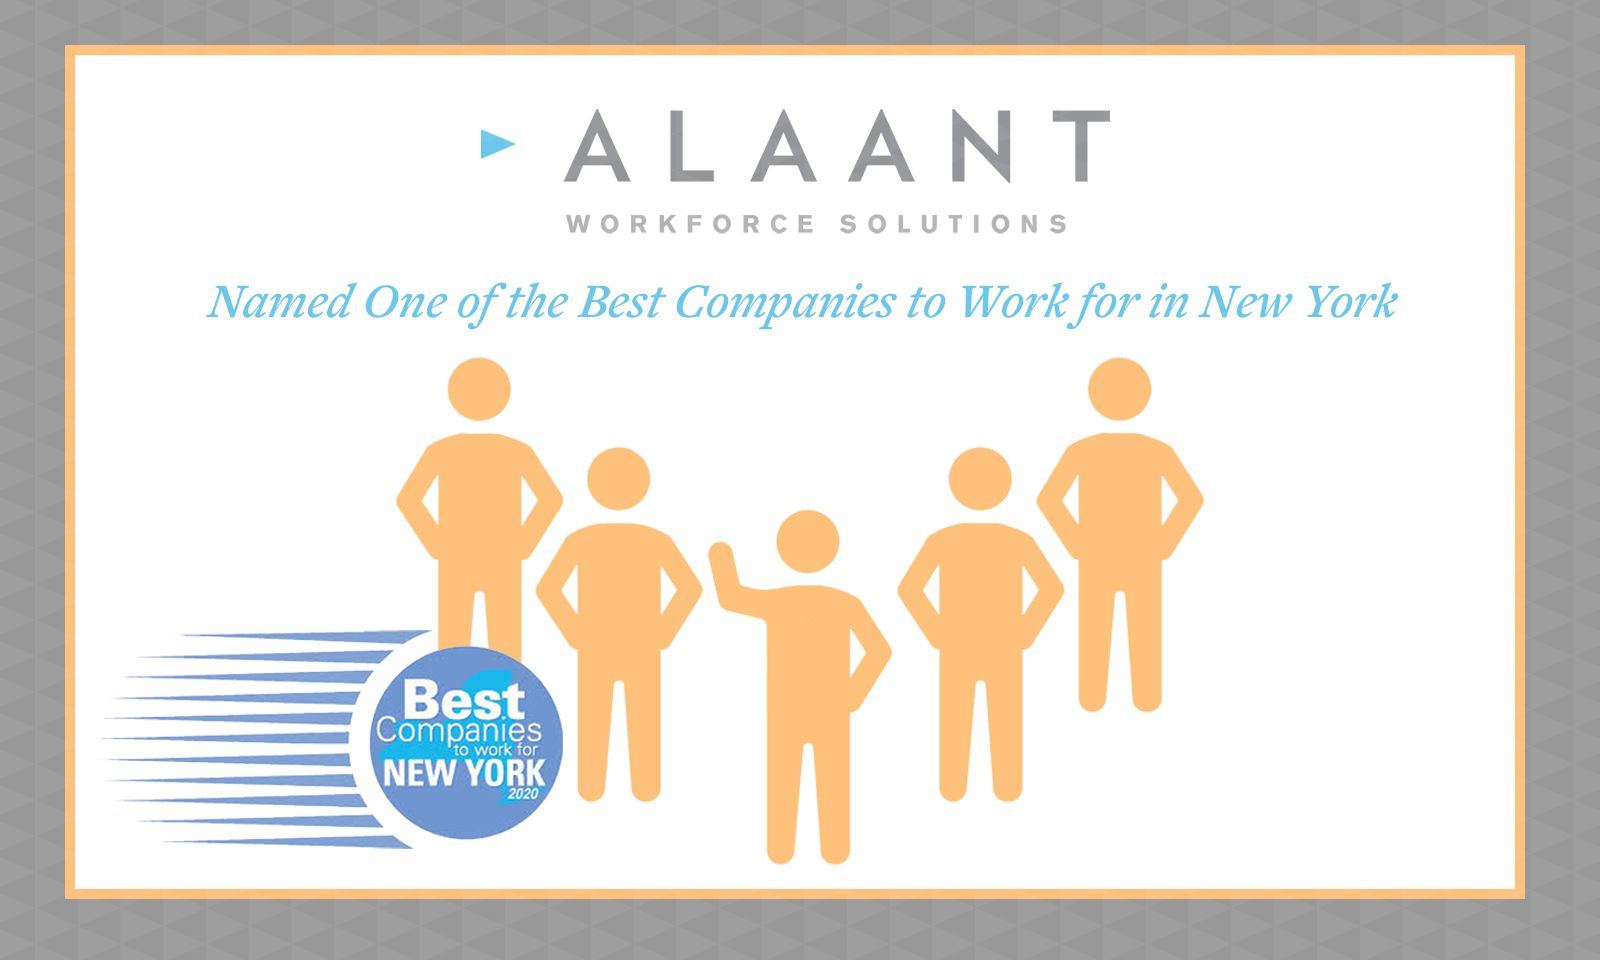 Alaant Workforce Solutions Named One of the Best Companies to Work for in New York